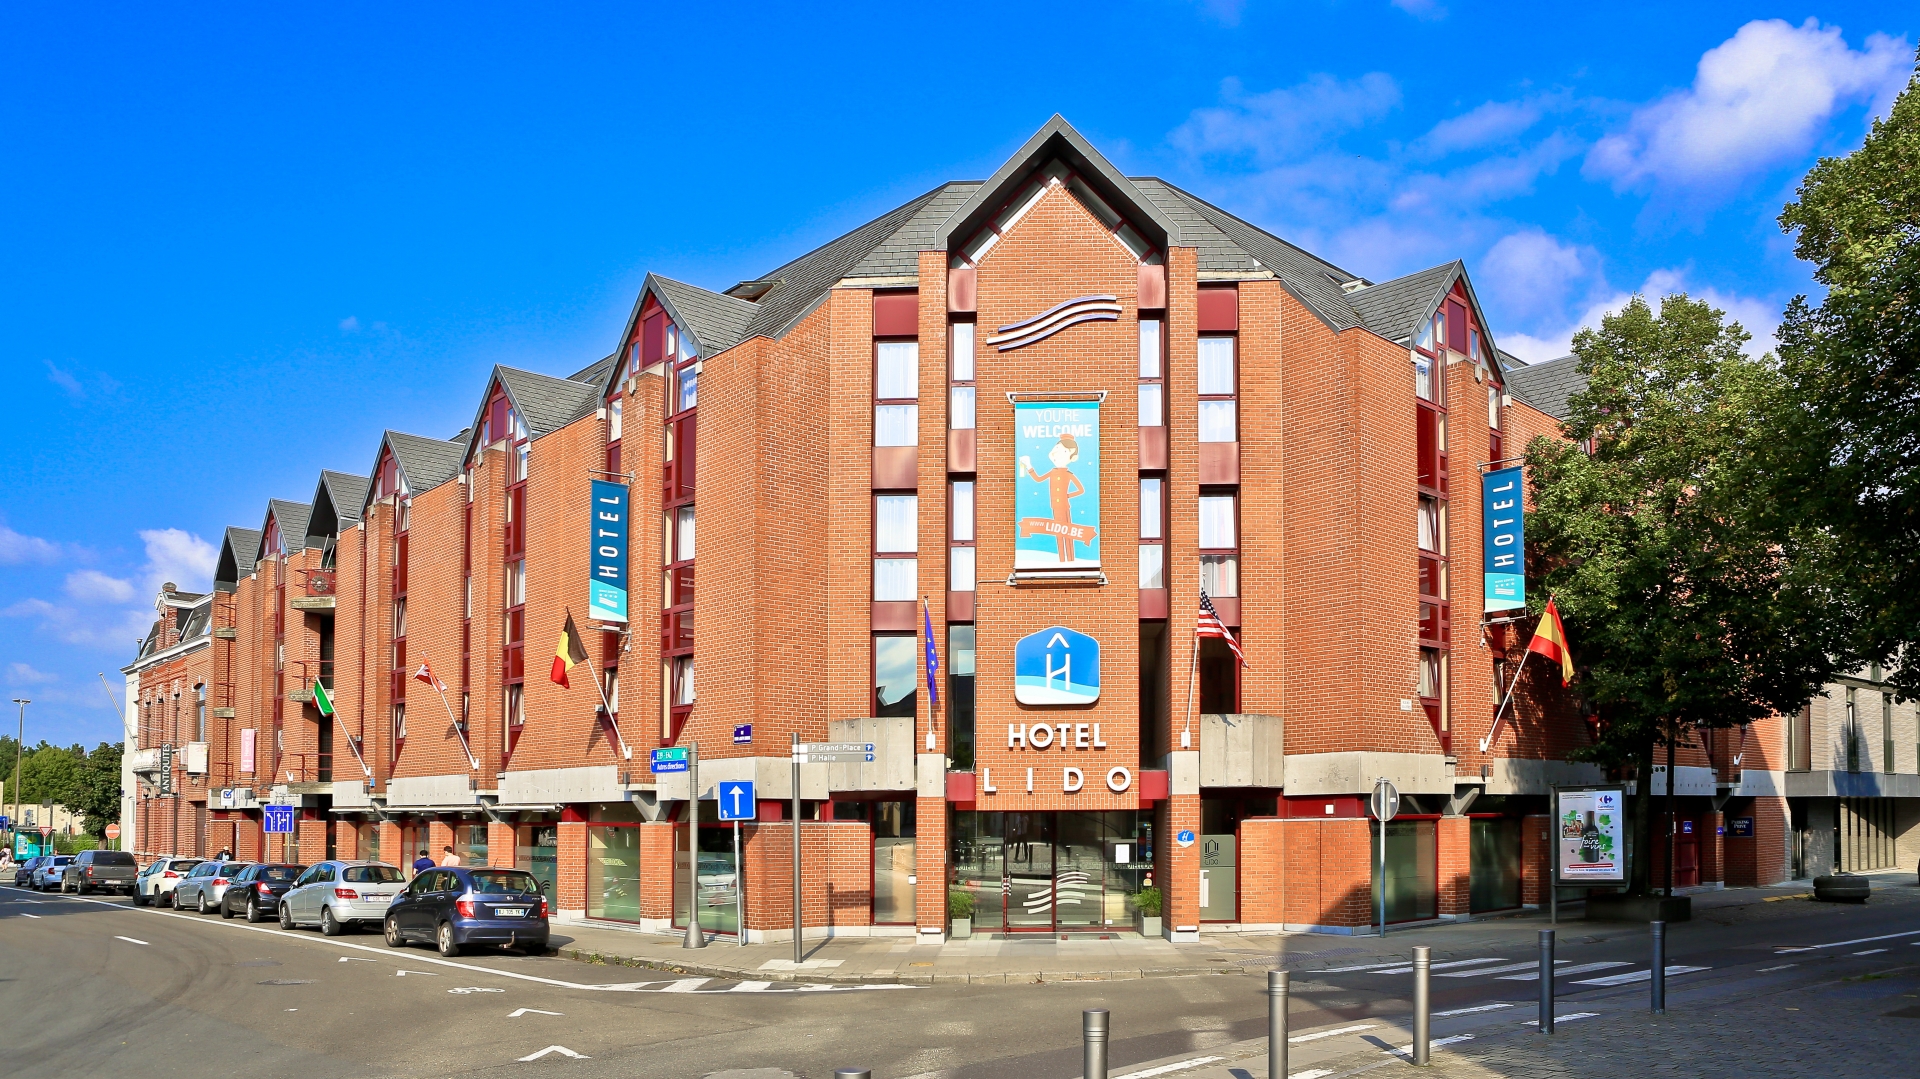 LIDO****Mons Centre <br/>65.00 ew <br/> <a href='http://vakantieoplossing.nl/outpage/?id=08ed0e6bd8377c43e39007e7c1965ef4' target='_blank'>View Details</a>